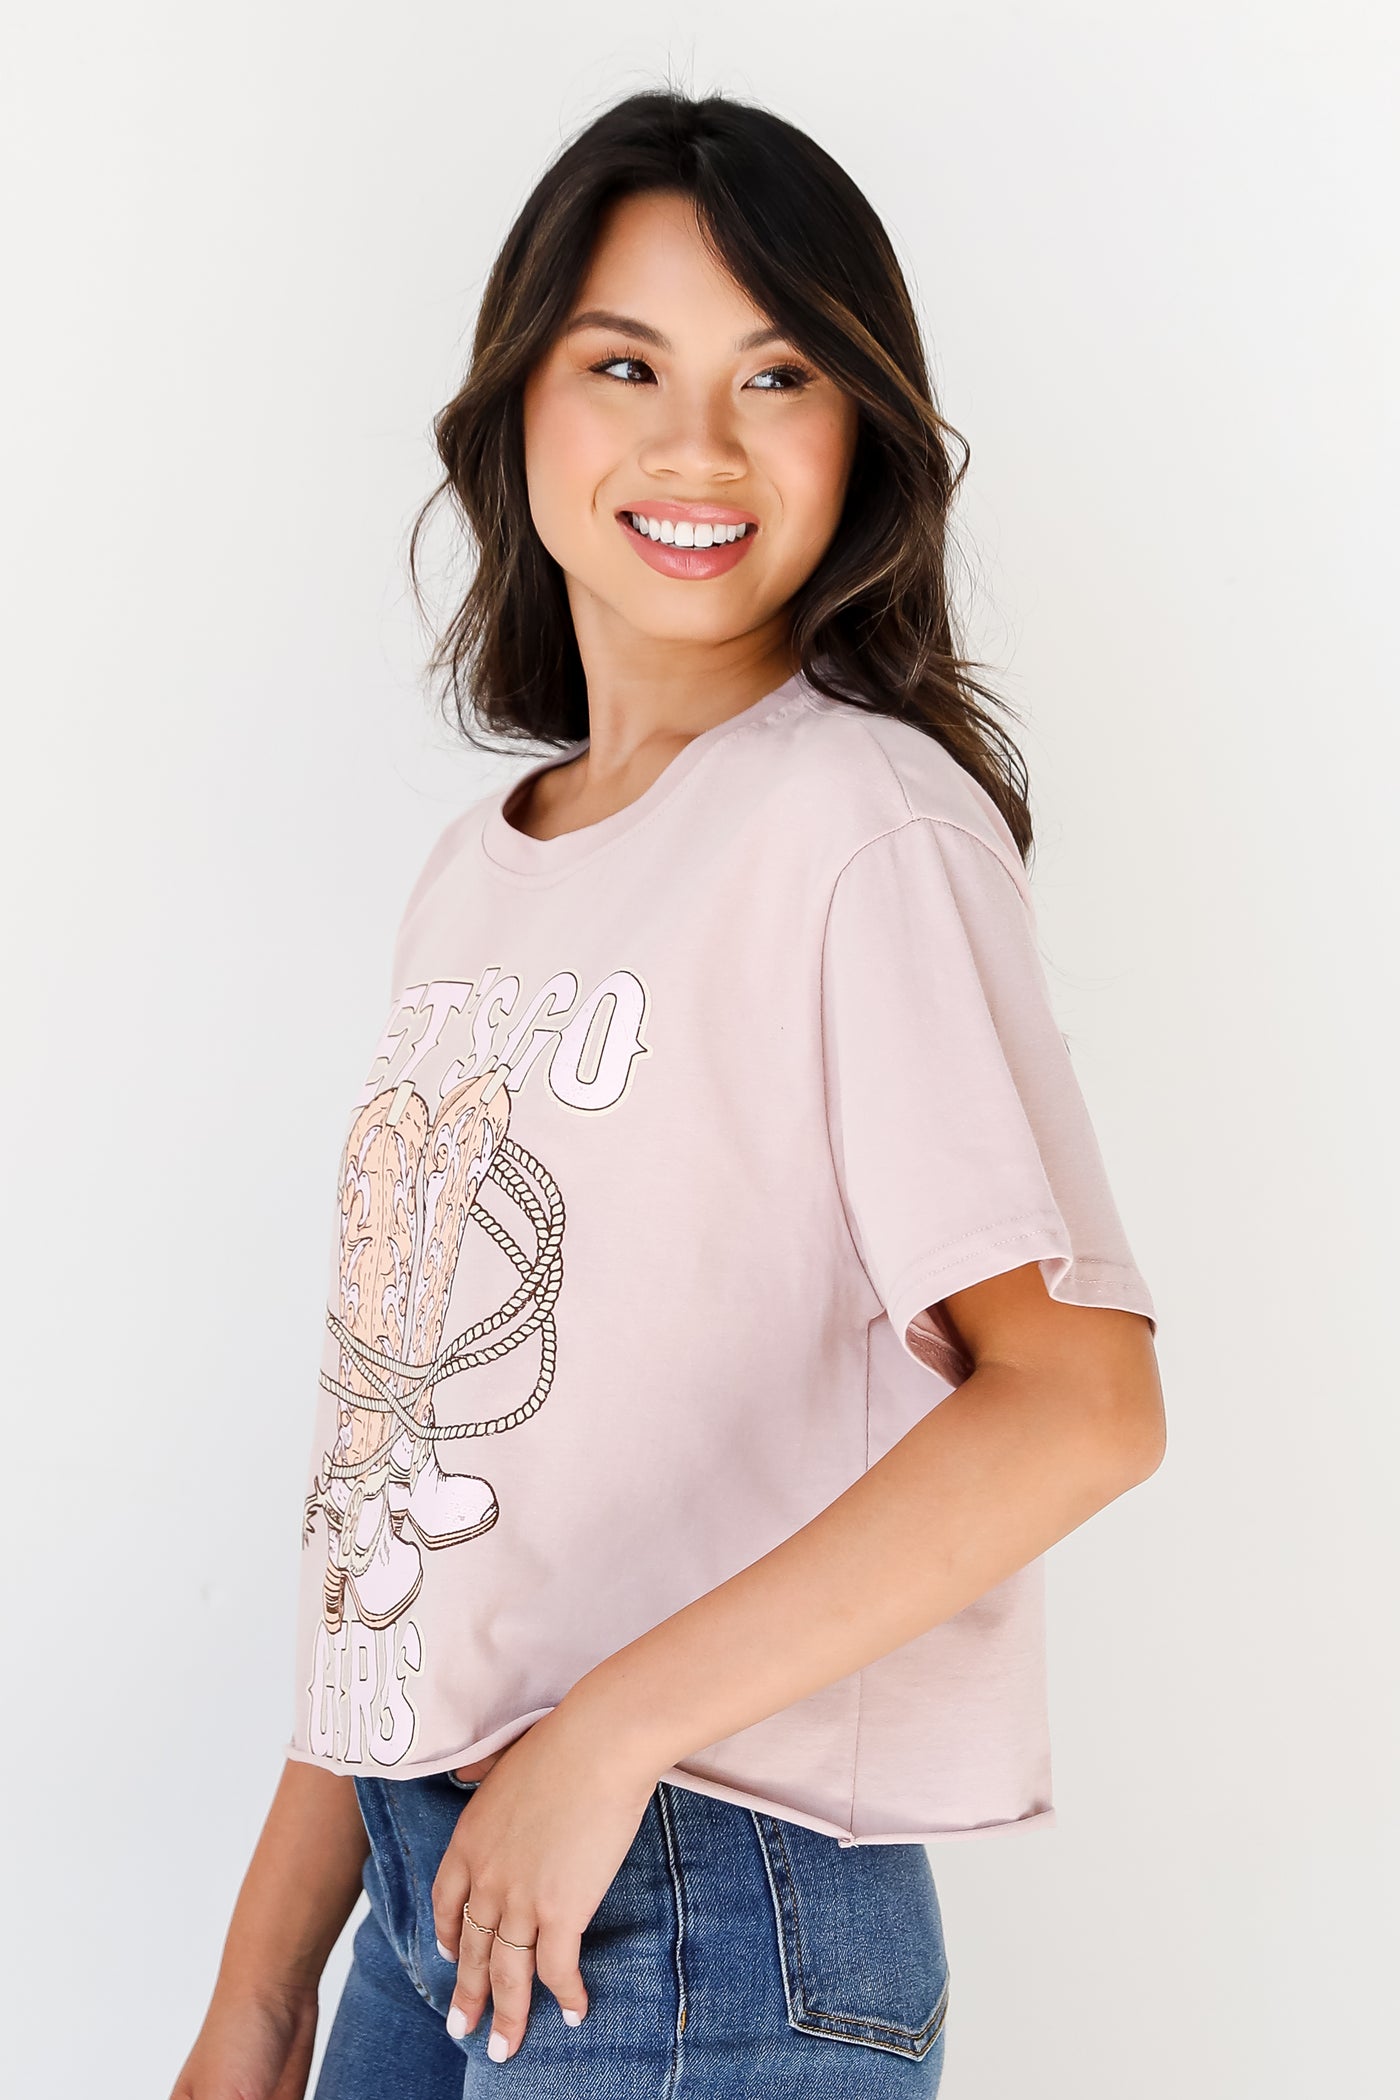 Let's Go Girls Cropped Graphic Tee side view